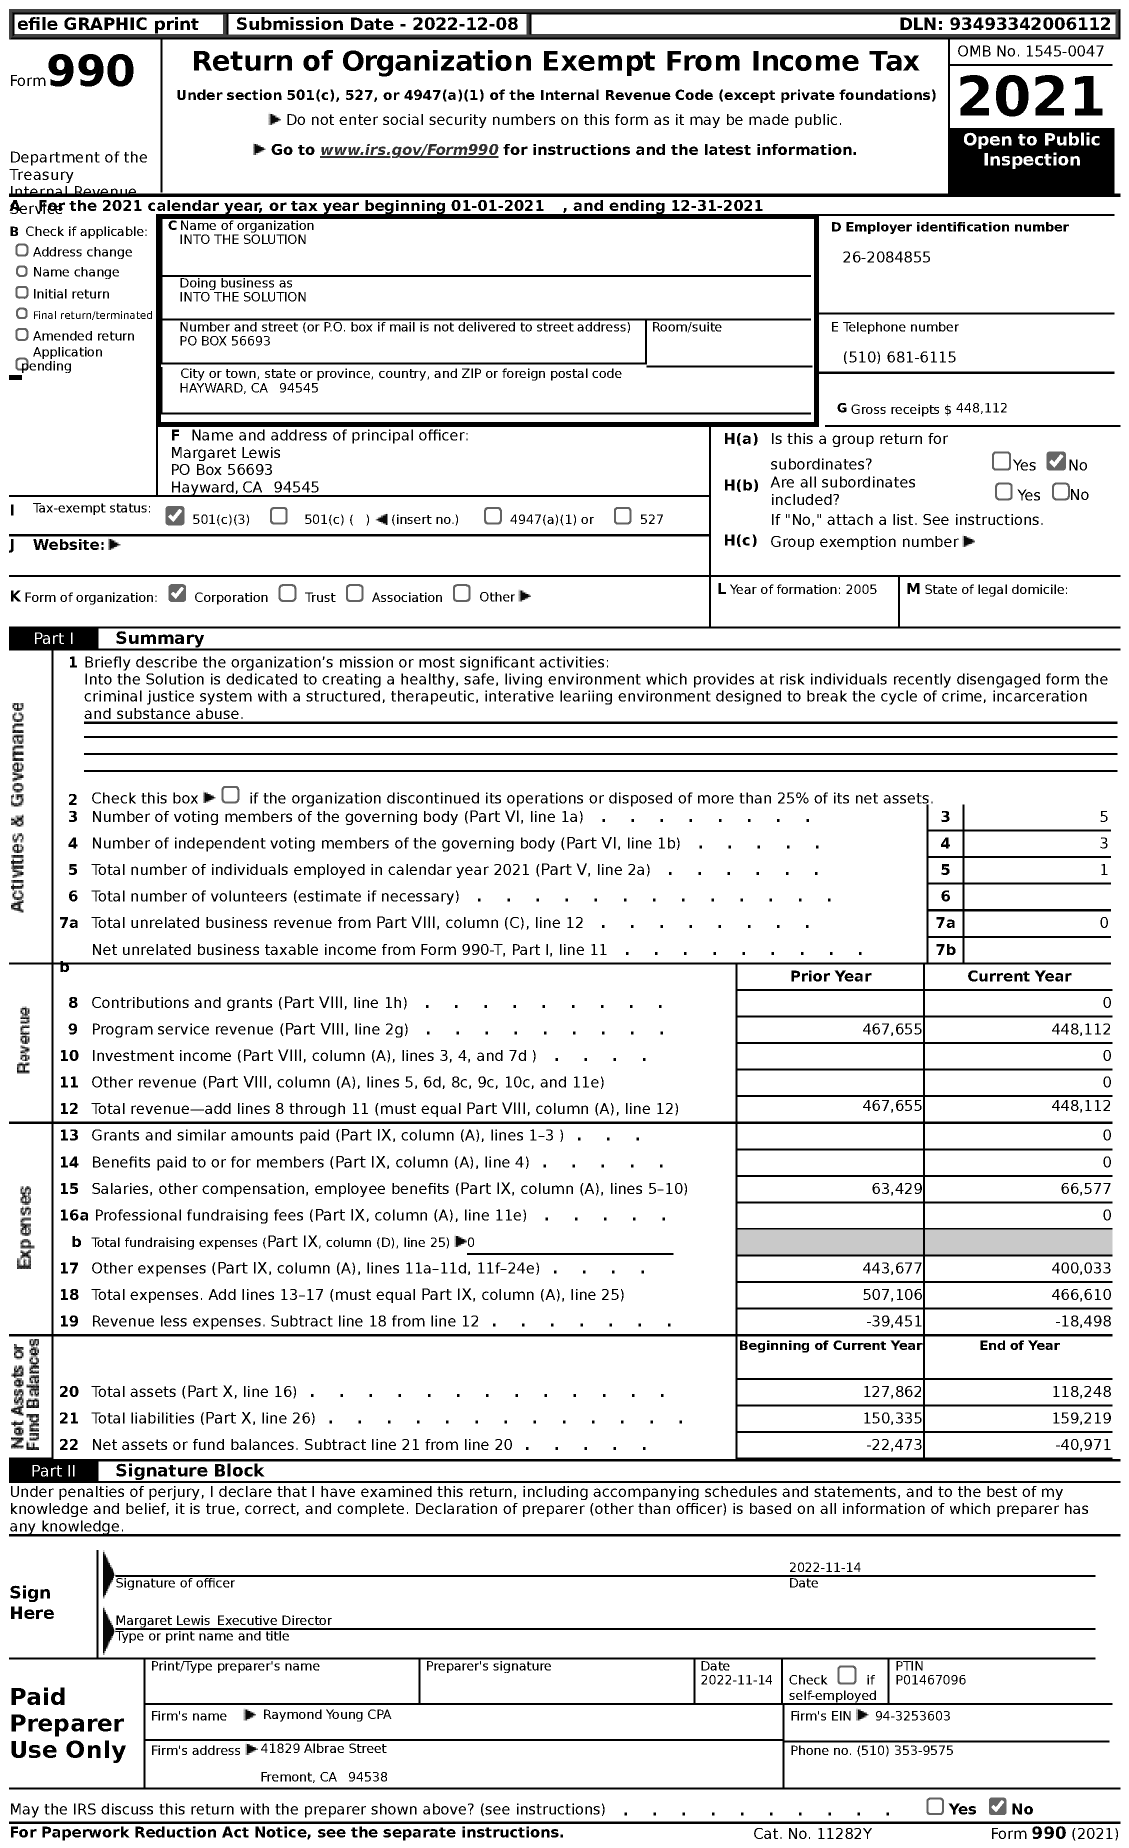 Image of first page of 2021 Form 990 for Into the Solution